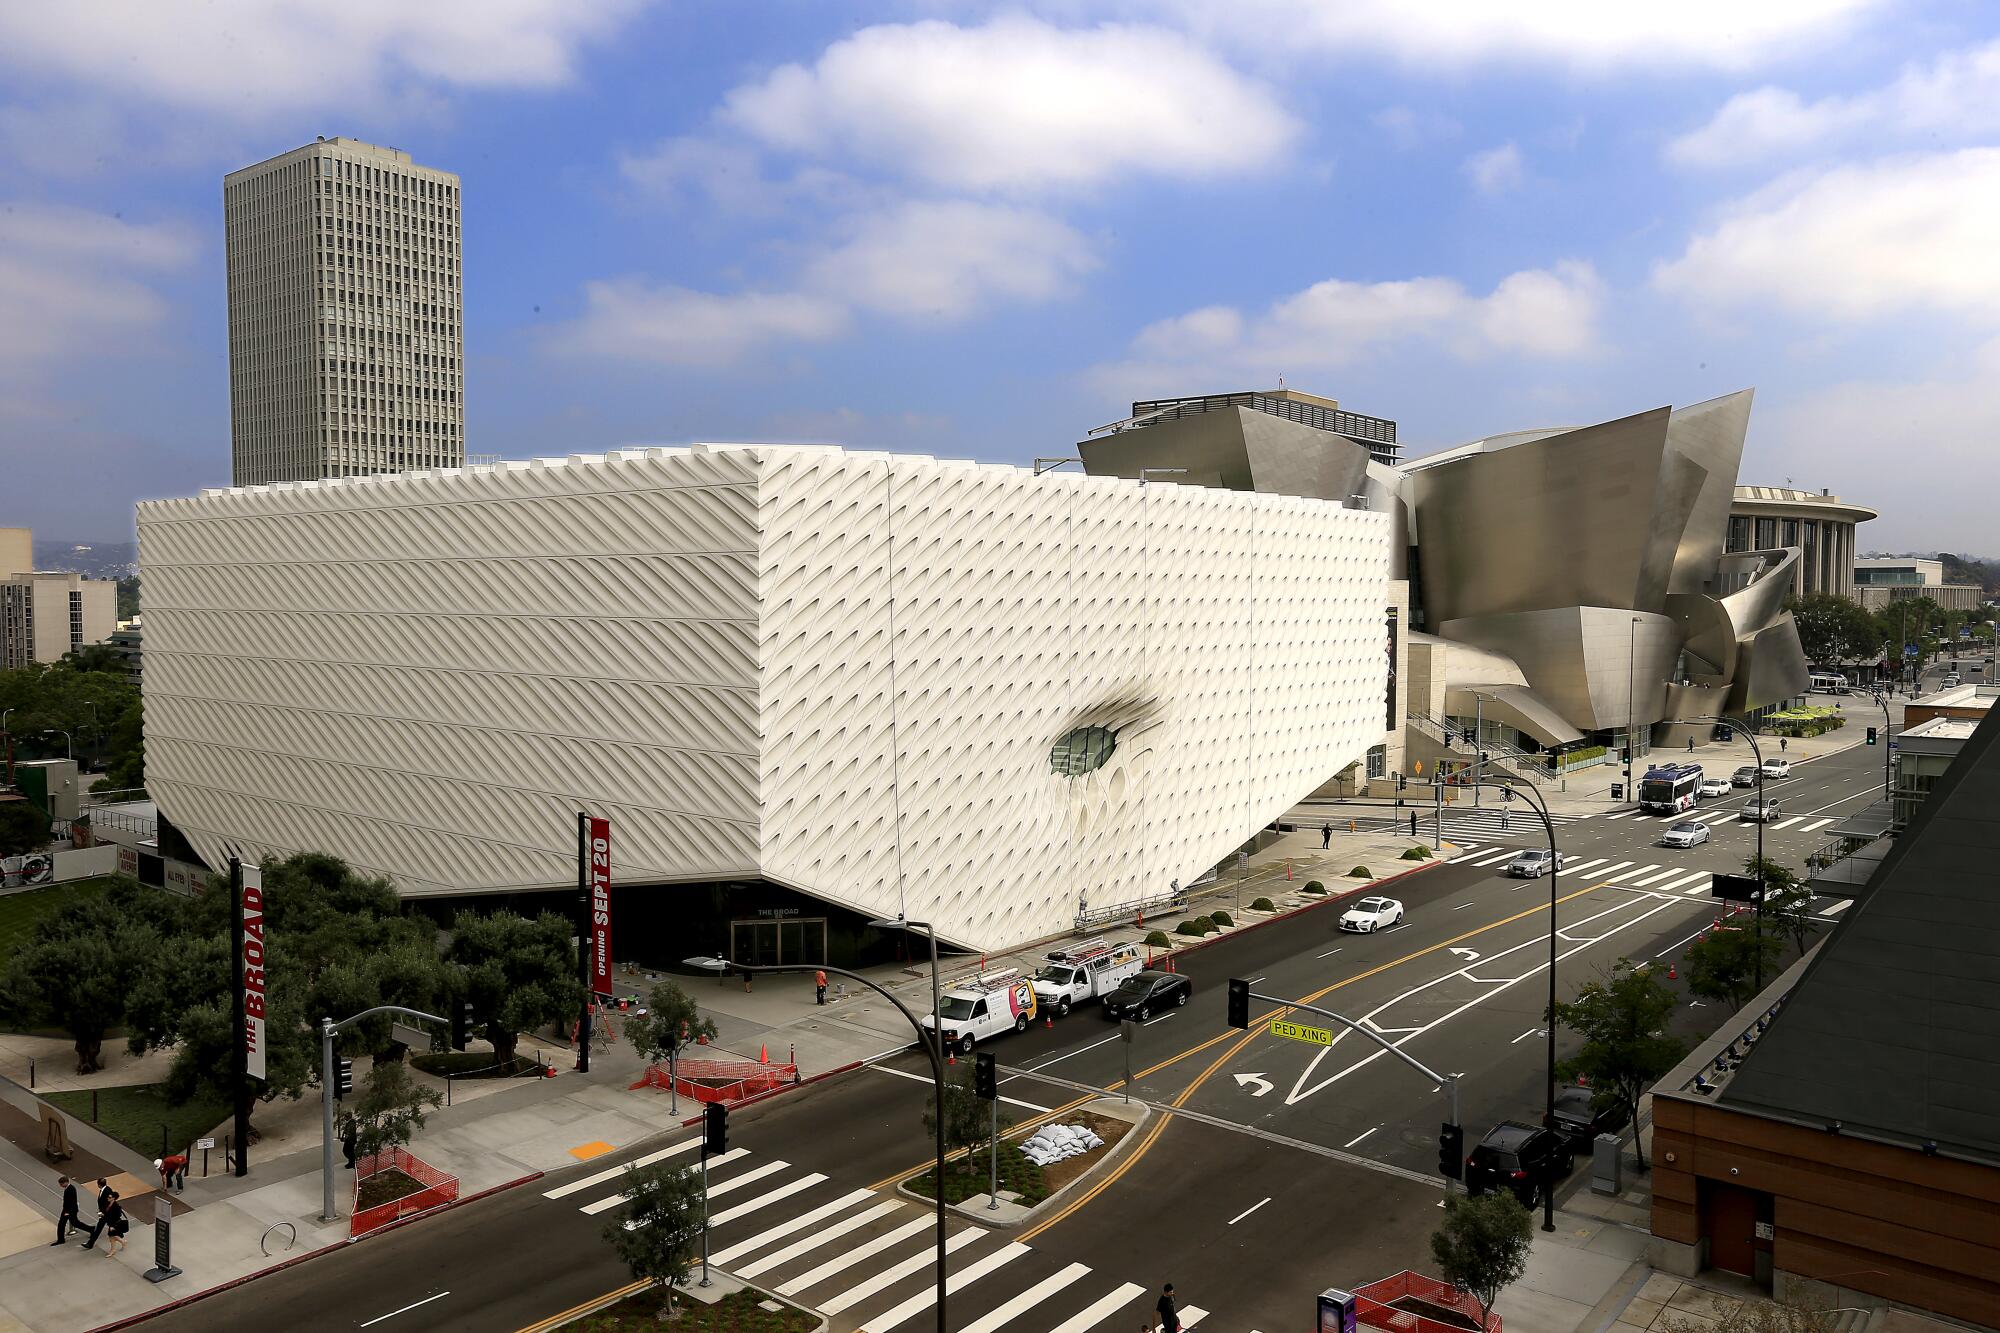 A view of the exterior of the Broad.